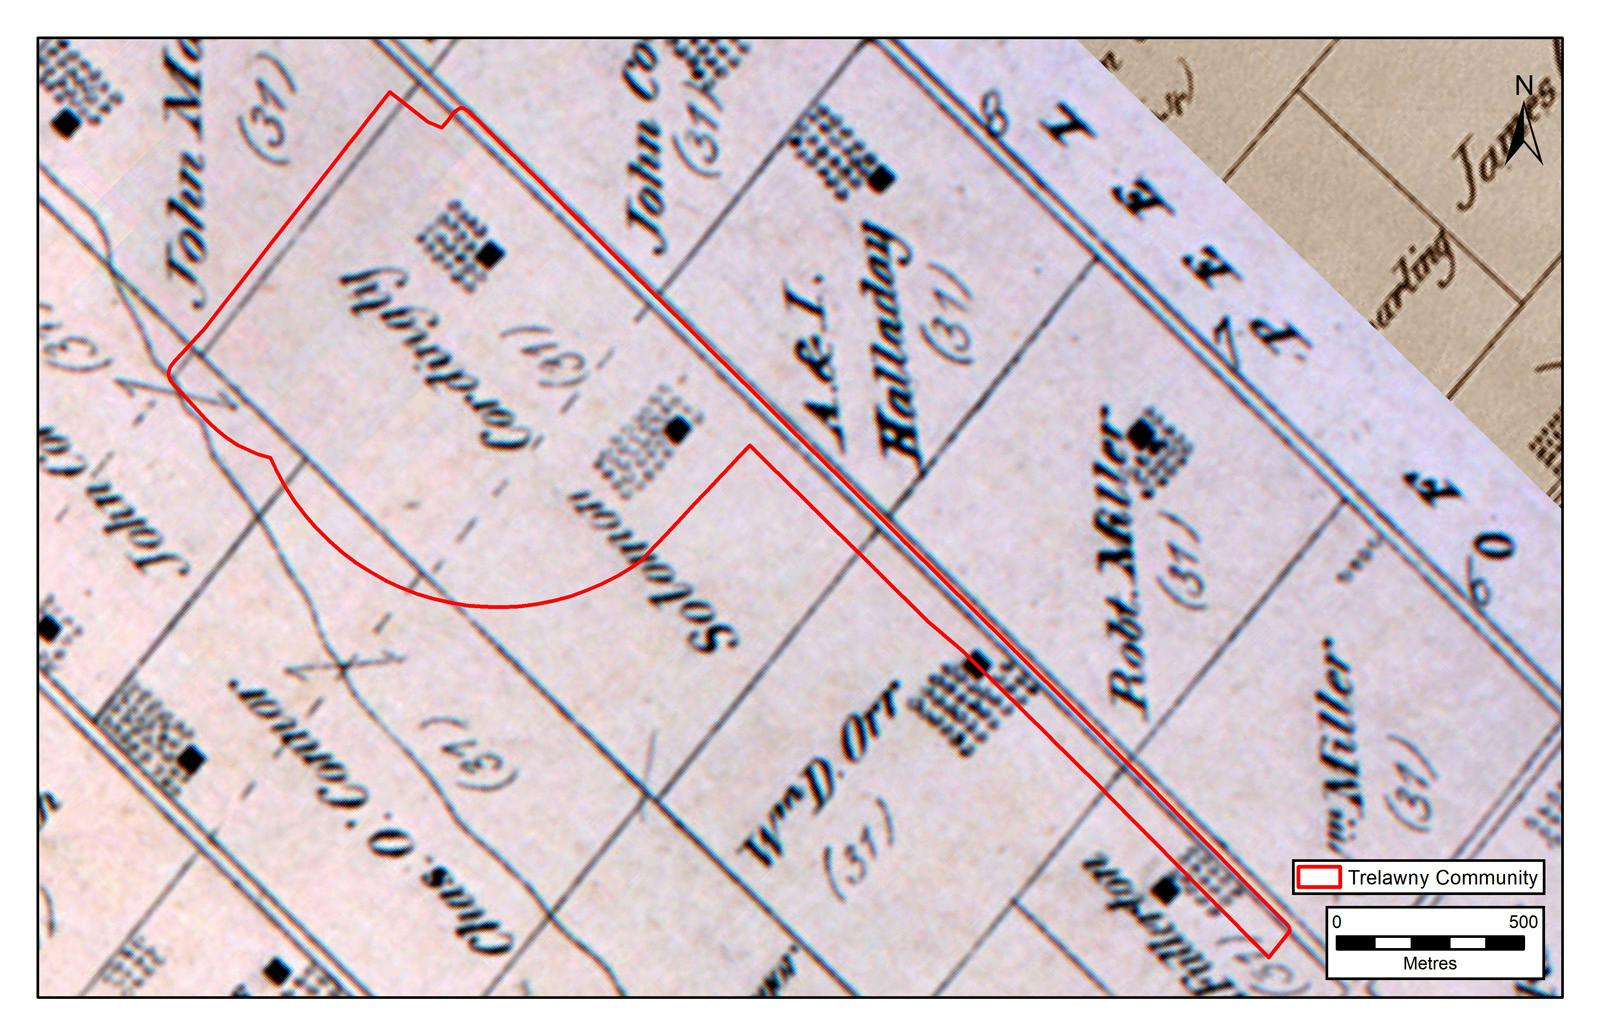 Location of Trelawny Community on historical mapping from 1880